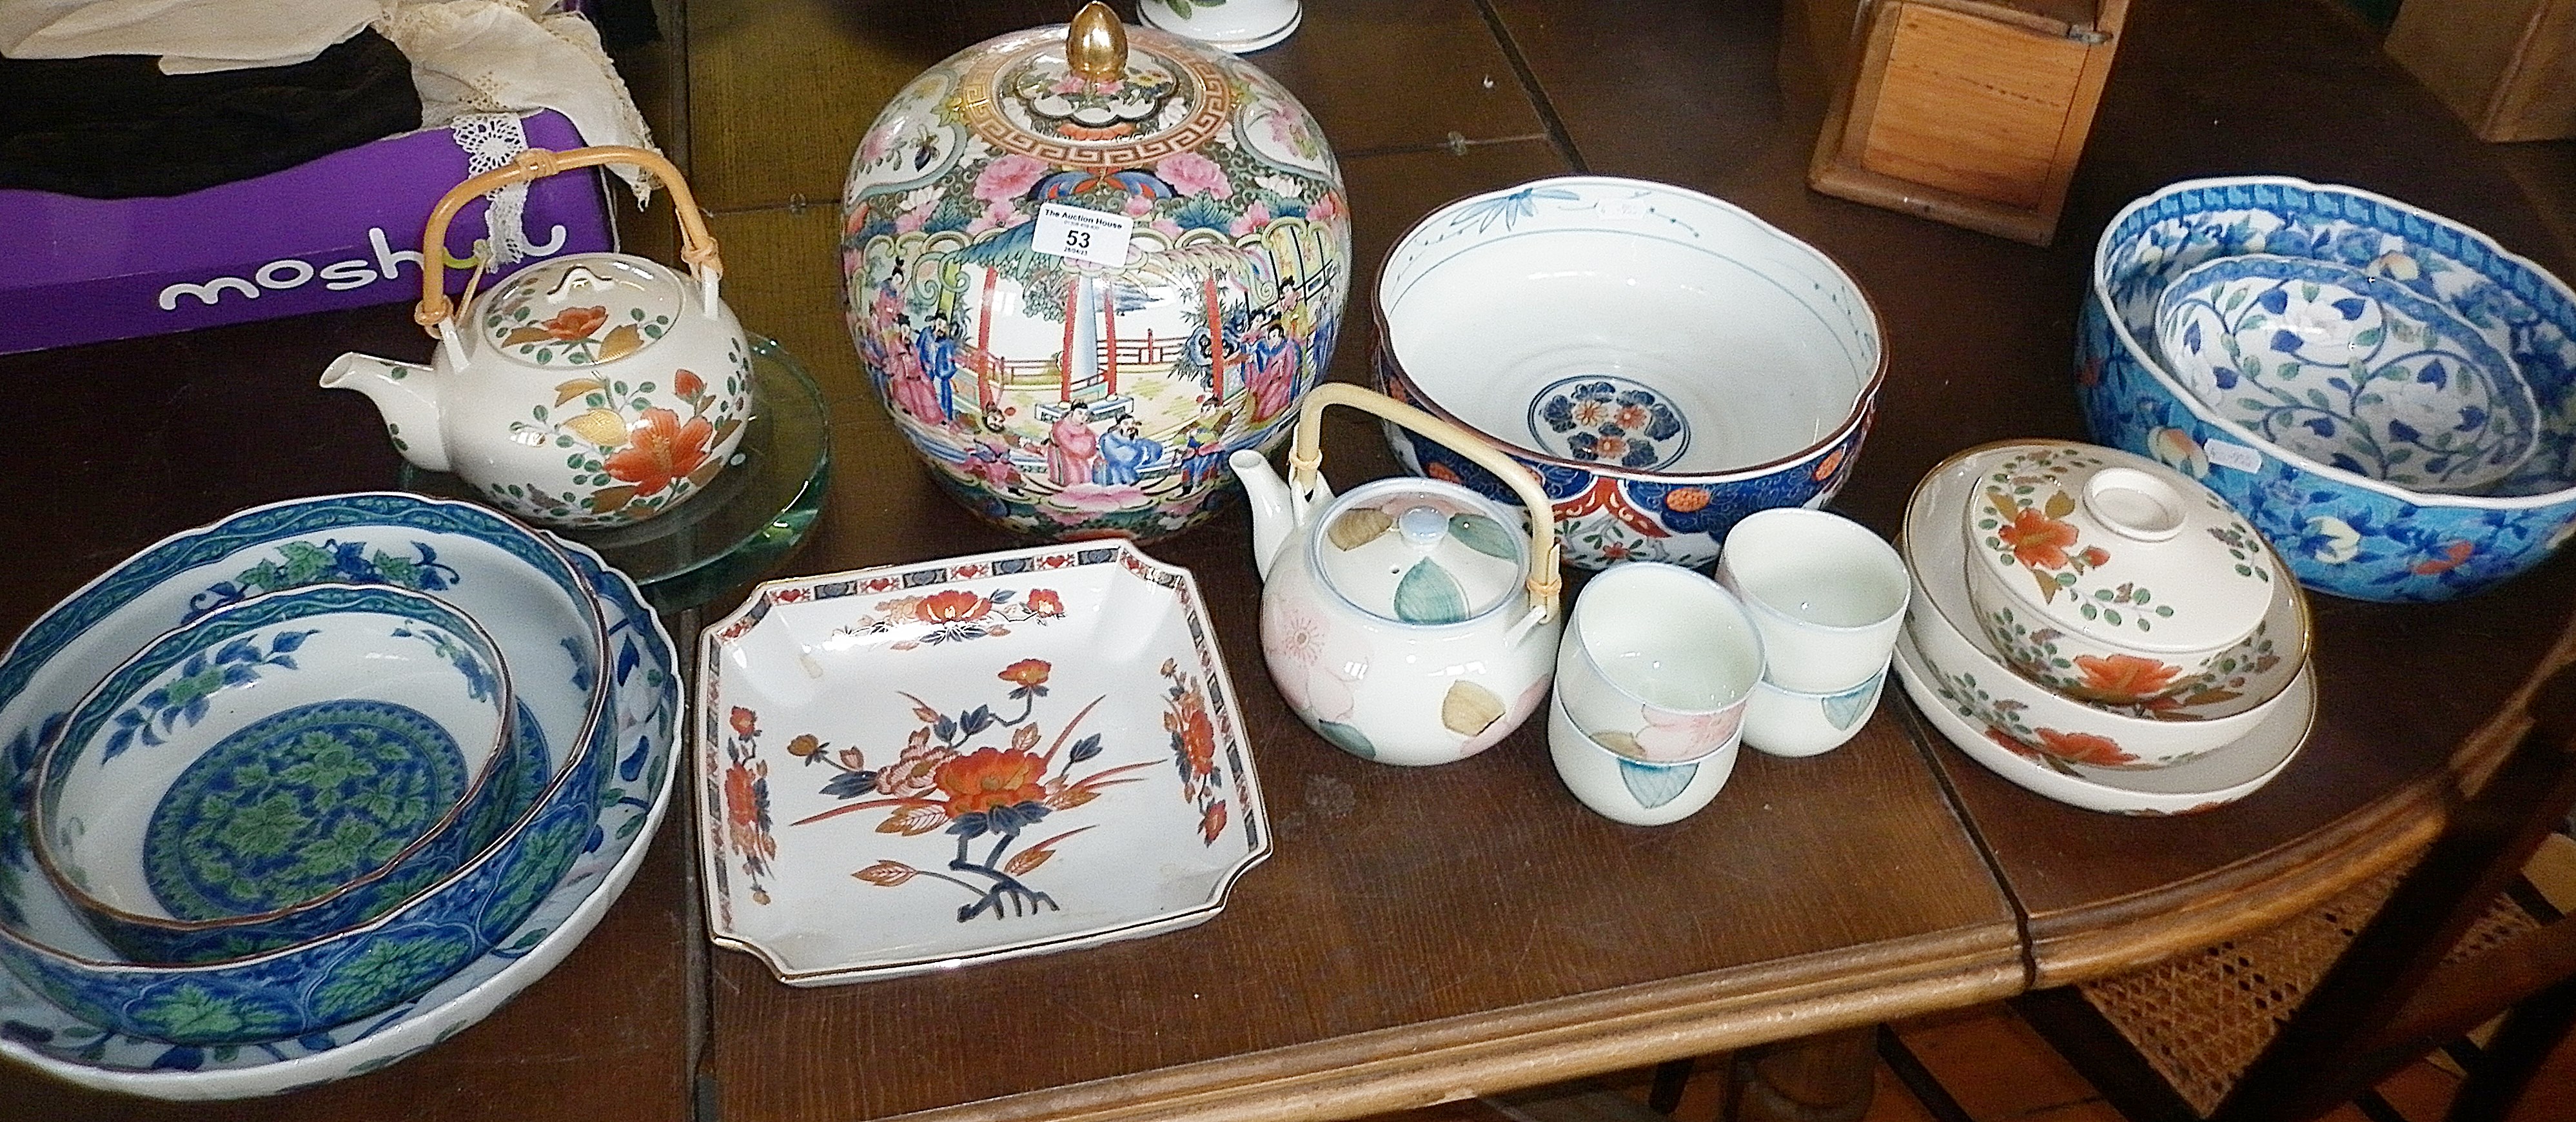 Collection of 20th c. Chinese and Japanese porcelain bowls, jars and teapots (17)